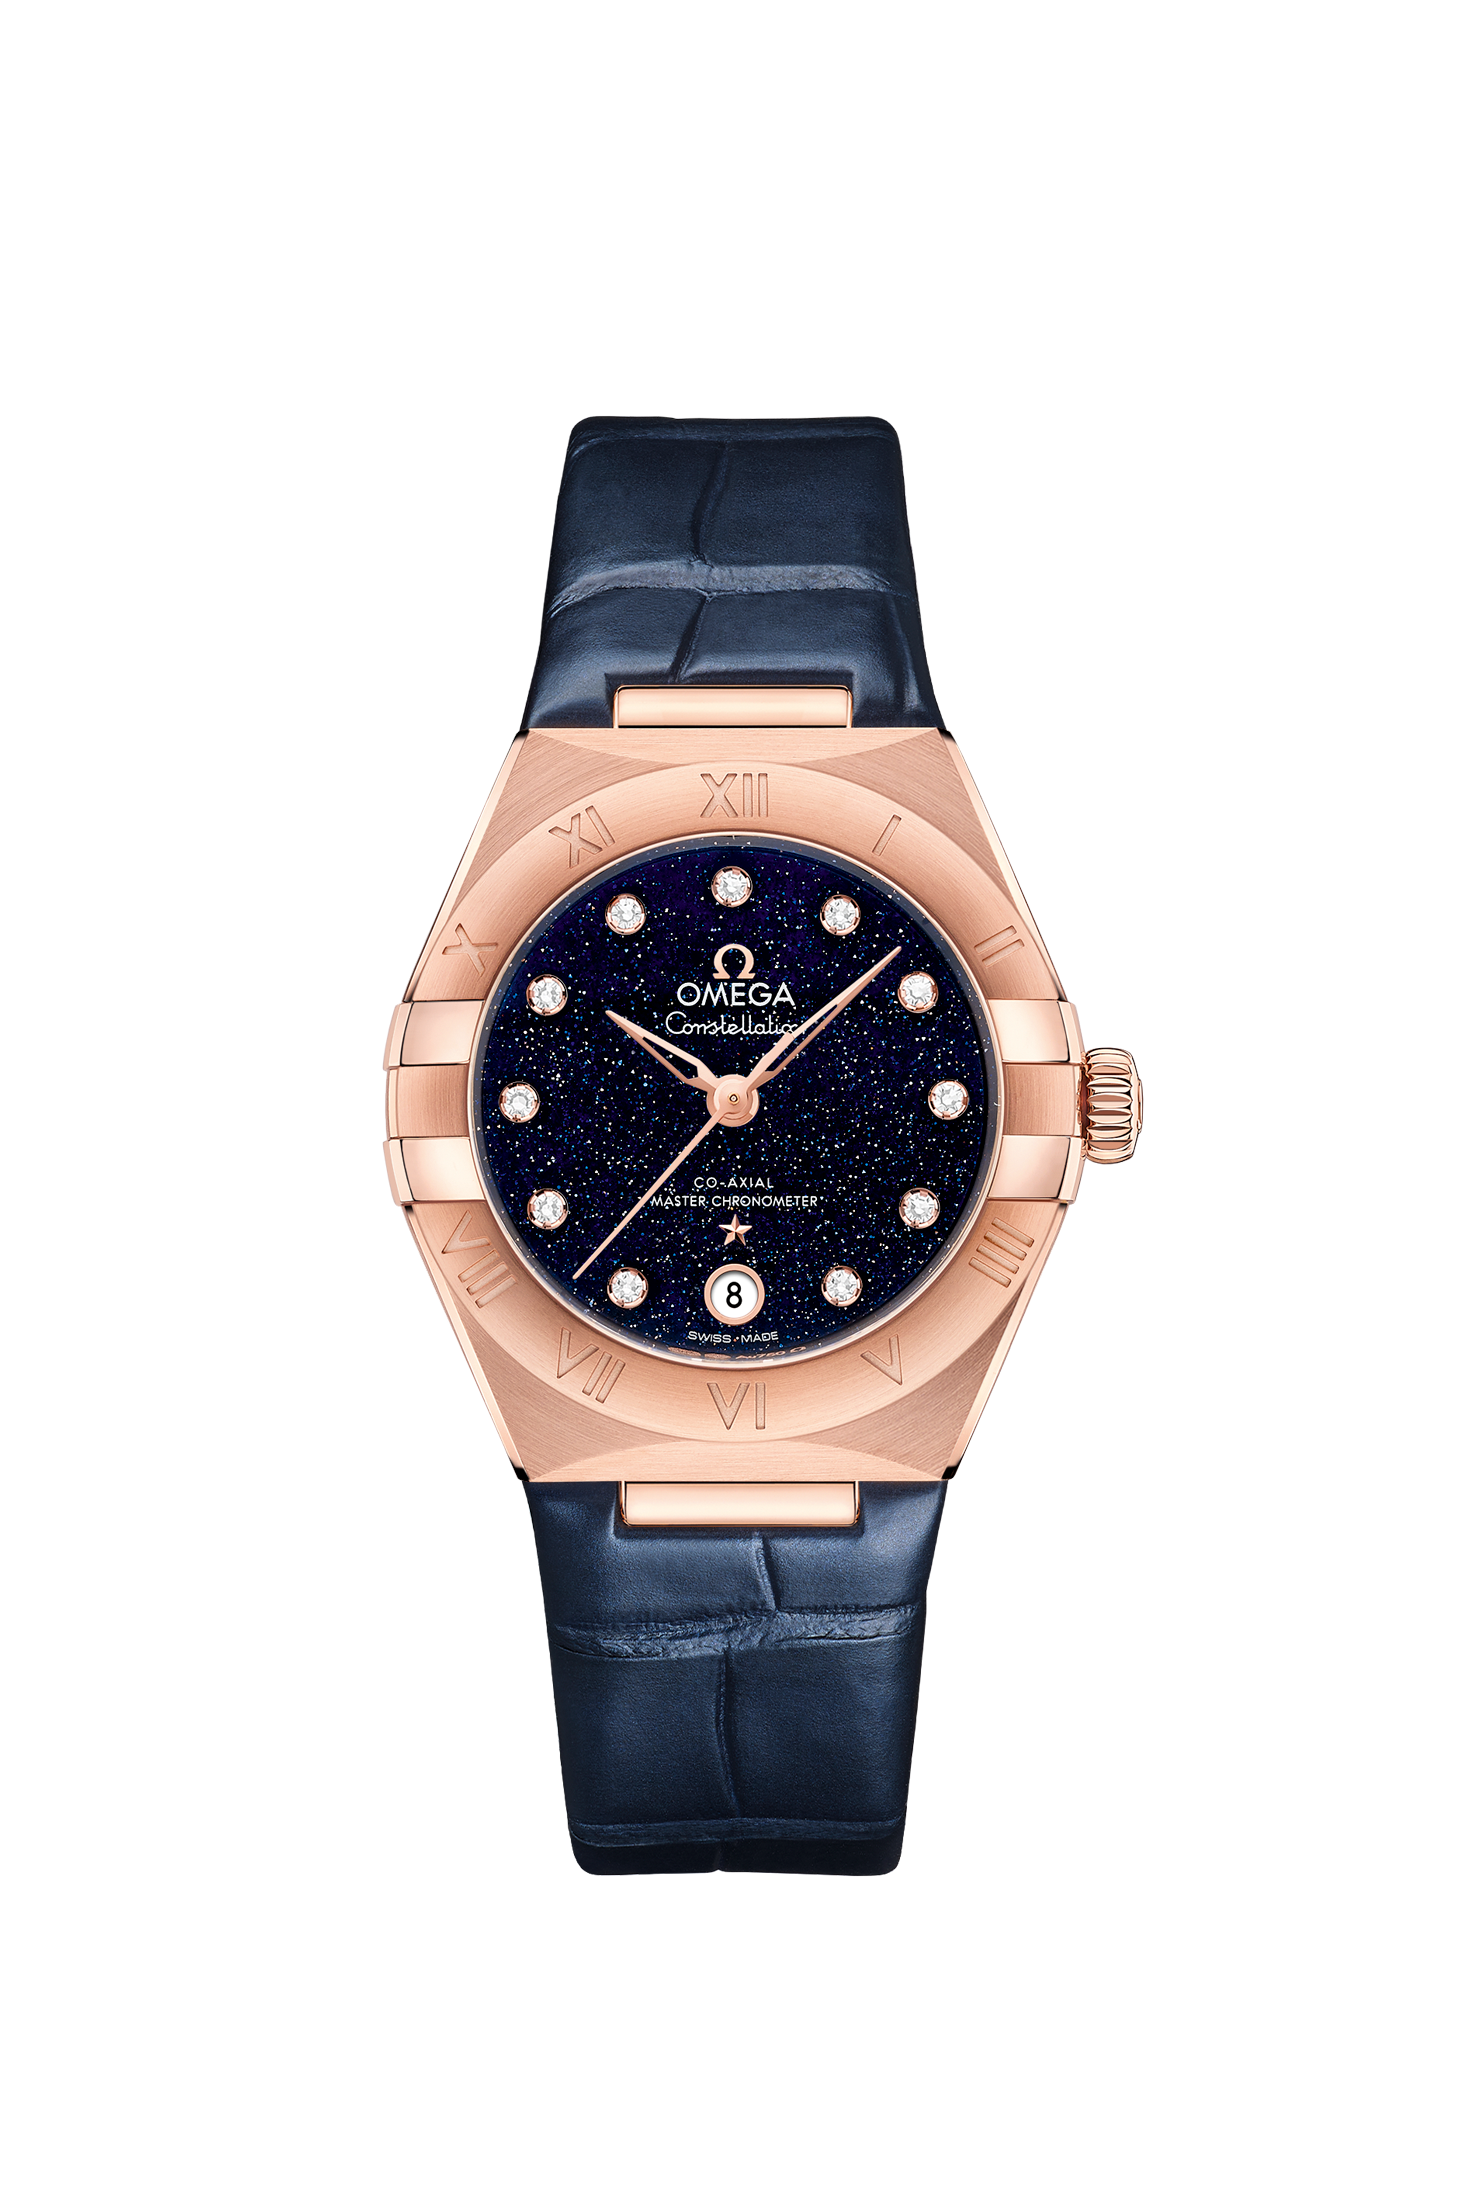 Ladies' watch  OMEGA, Constellation Co Axial Master Chronometer / 29mm, SKU: 131.53.29.20.53.003 | watchapproach.com